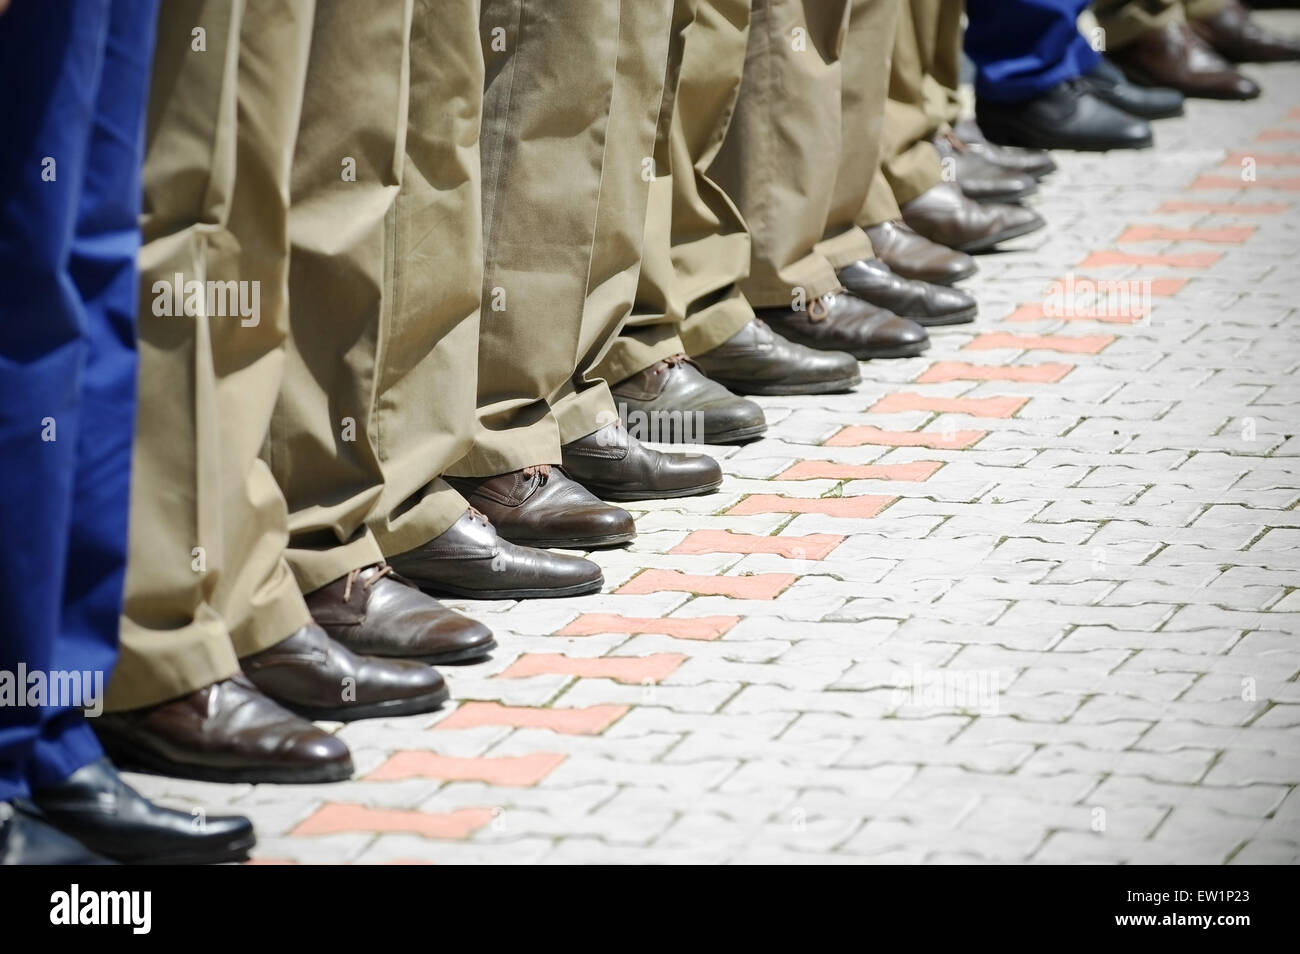 Blue and khaki military uniform stands out from a row of soldiers during military parade Stock Photo